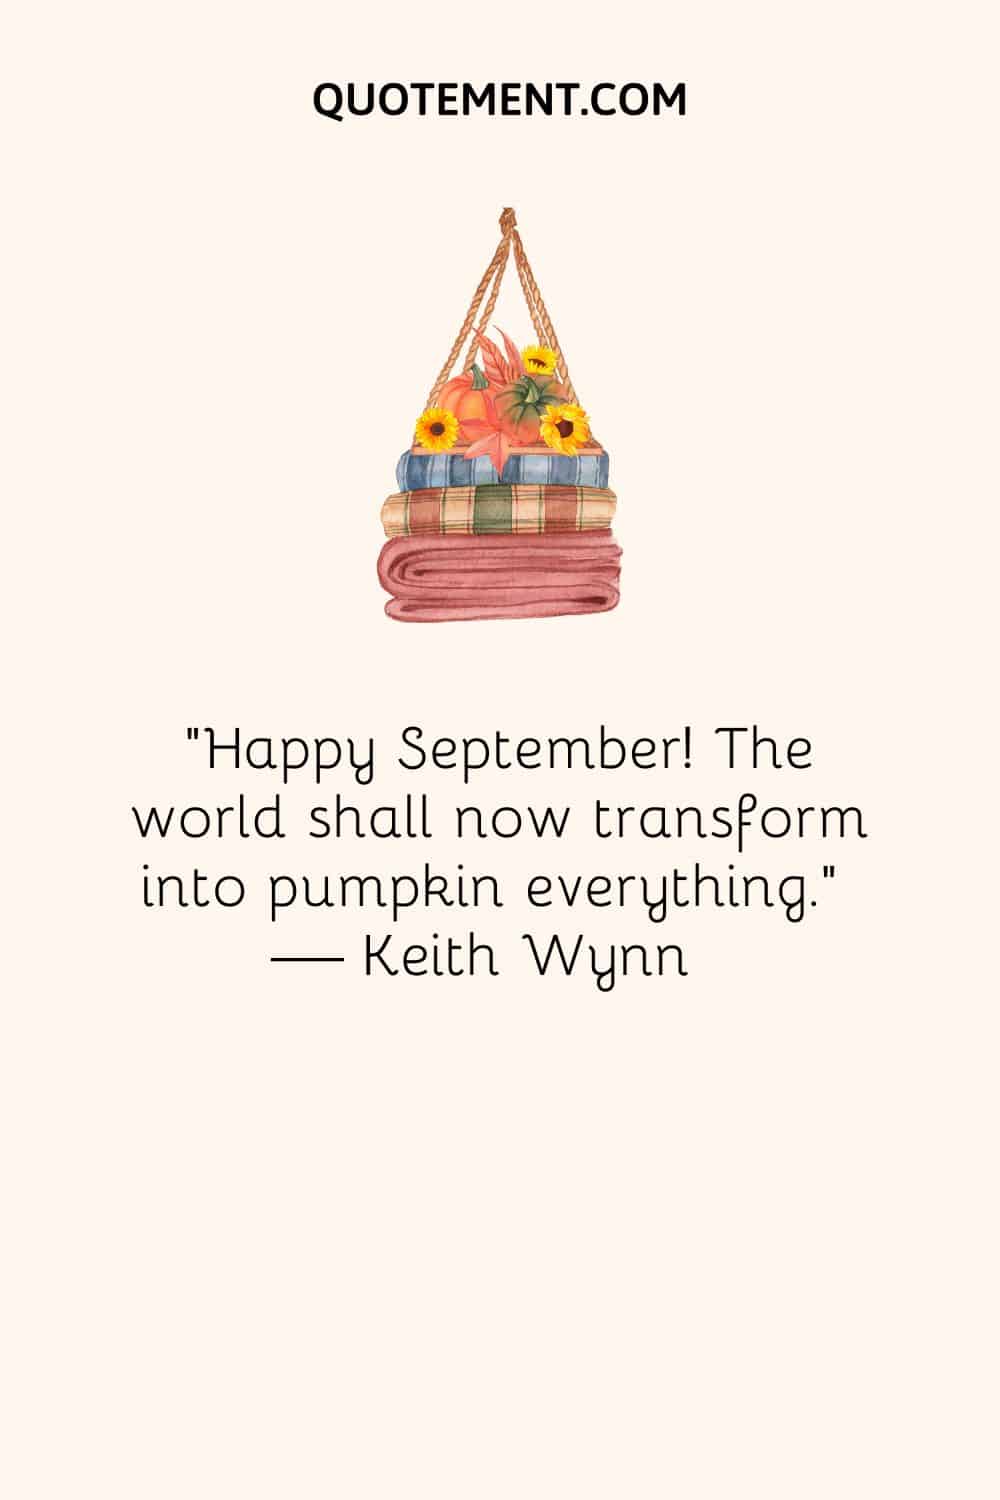 “Happy September! The world shall now transform into pumpkin everything.” ― Keith Wynn